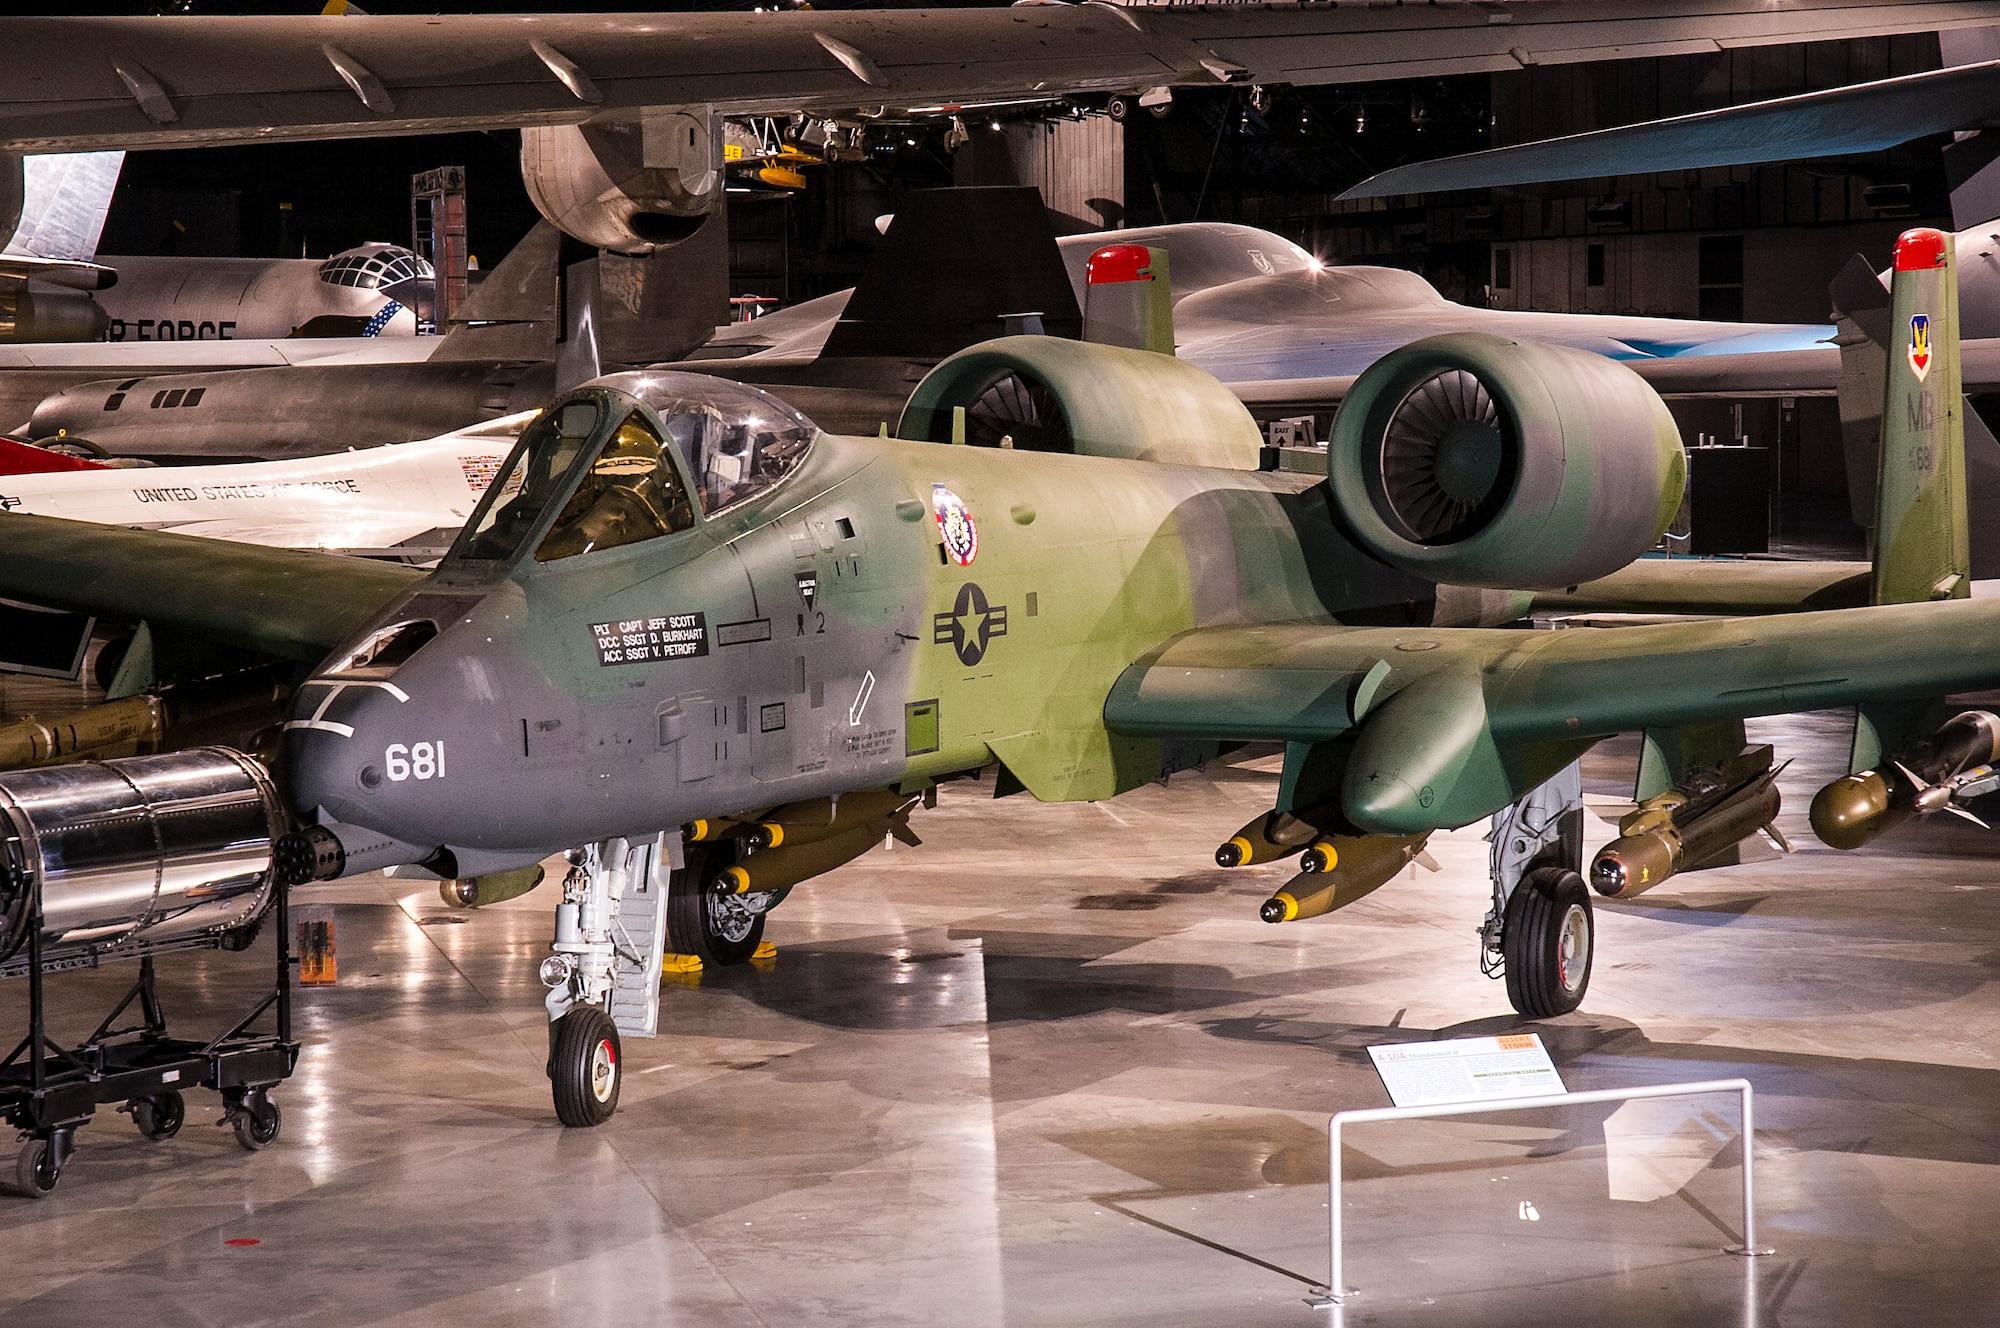 DAYTON, Ohio -- Fairchild Republic A-10A Thunderbolt II in the Cold War Gallery at the National Museum of the United States Air Force. (U.S. Air Force photo by Ken LaRock)